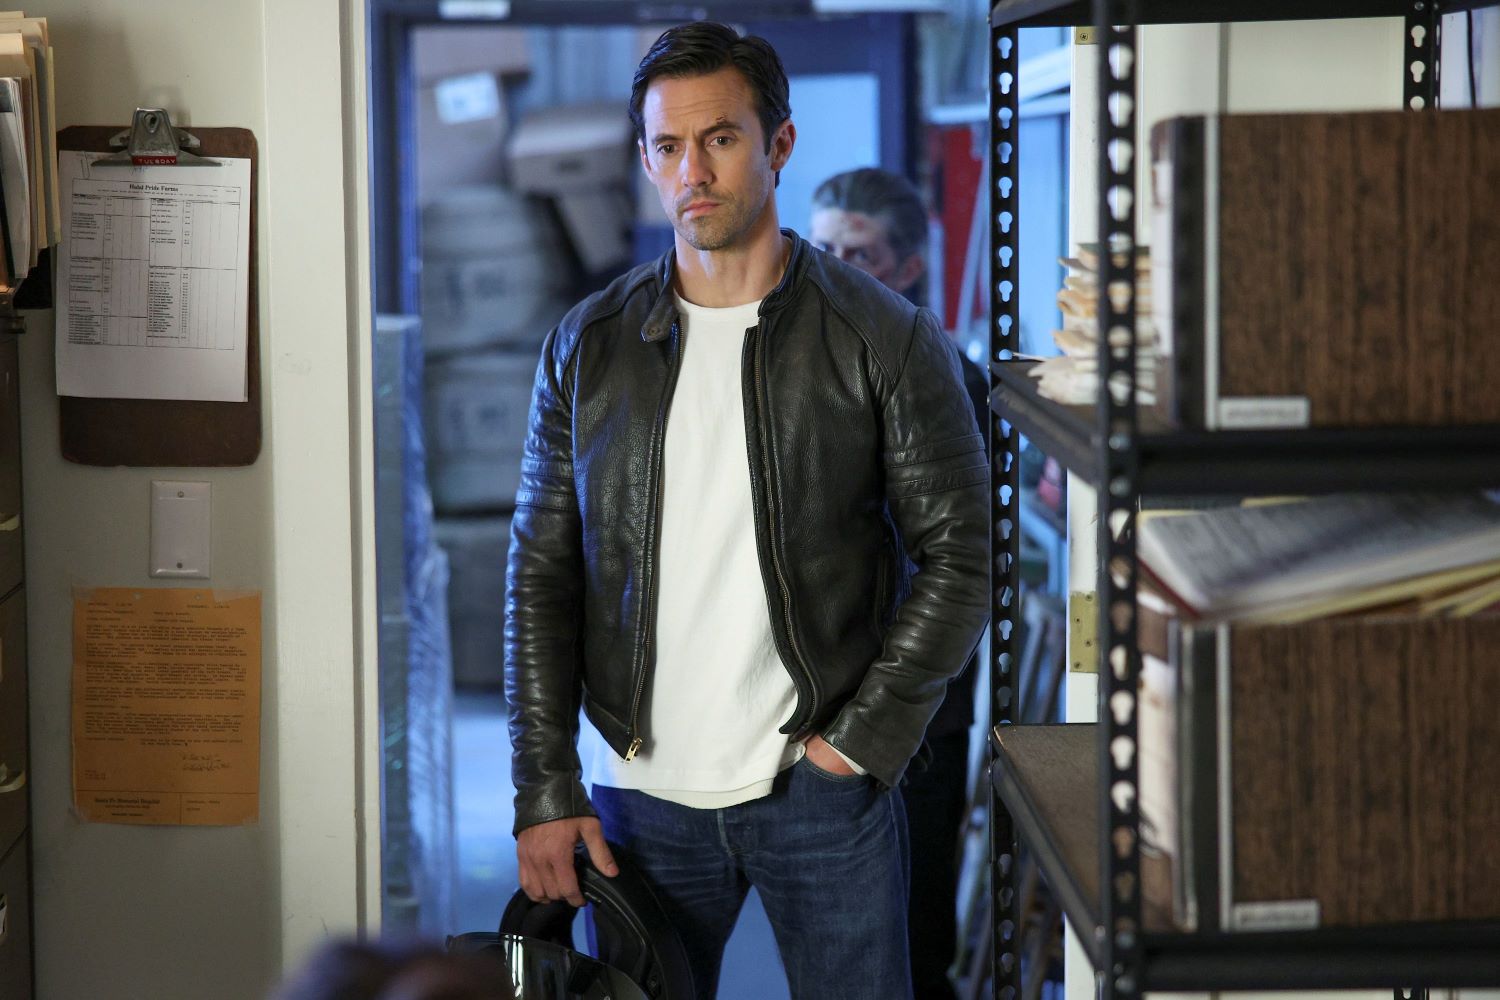 Milo Ventimiglia, in character as Charlie Nicoletti in 'The Company You Keep' Season 1 Episode 5, wears a black leather jacket over a white shirt and blue jeans.